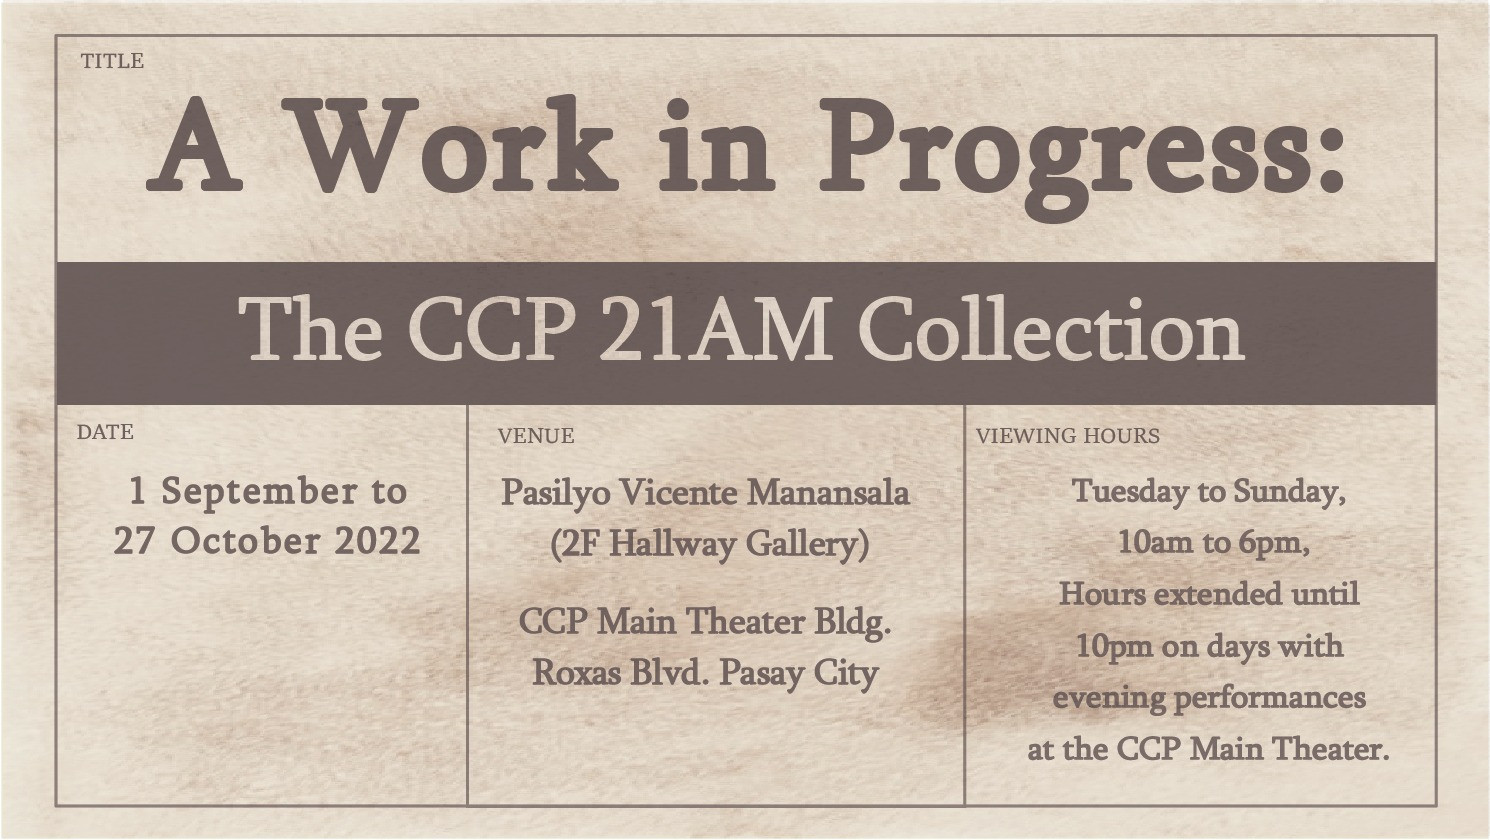 A Work in Progress: The CCP 21AM Collection